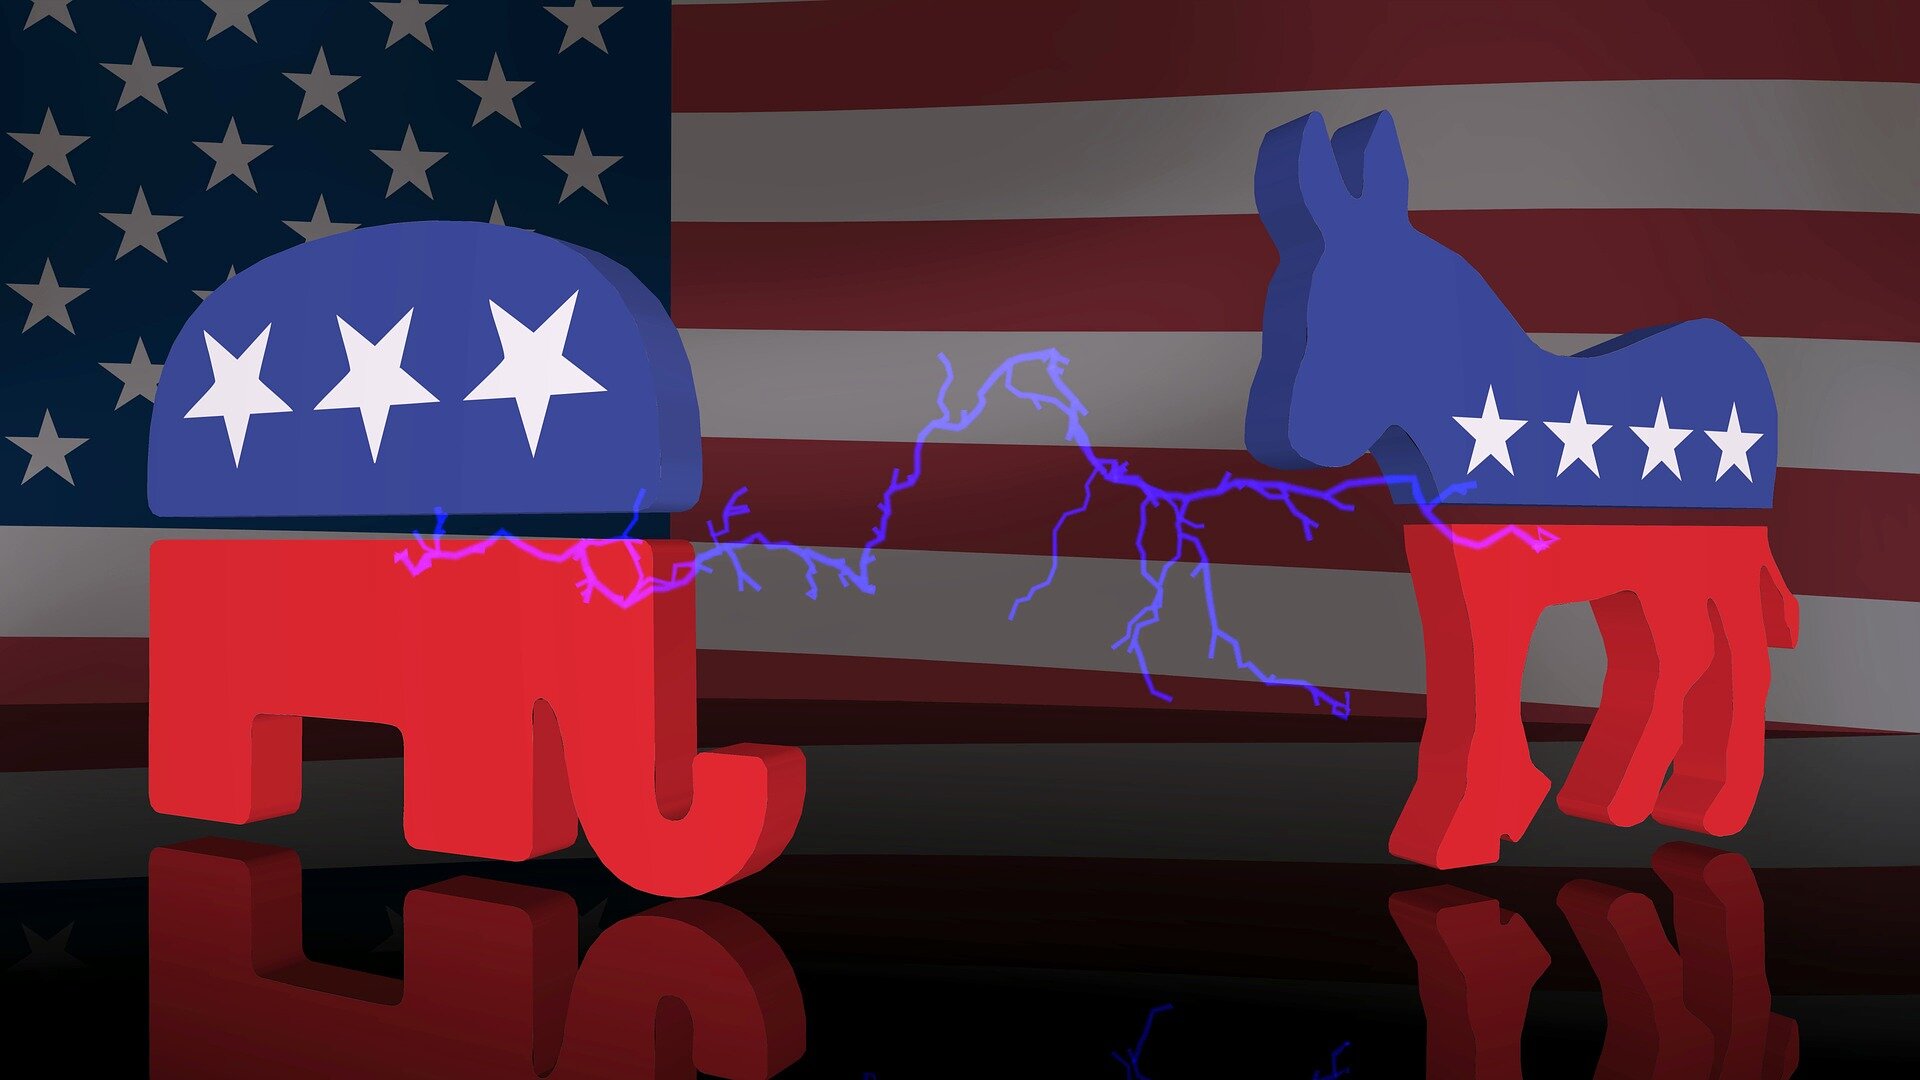 Are Republicans and Democrats driven by hatred of one another? Less than you think